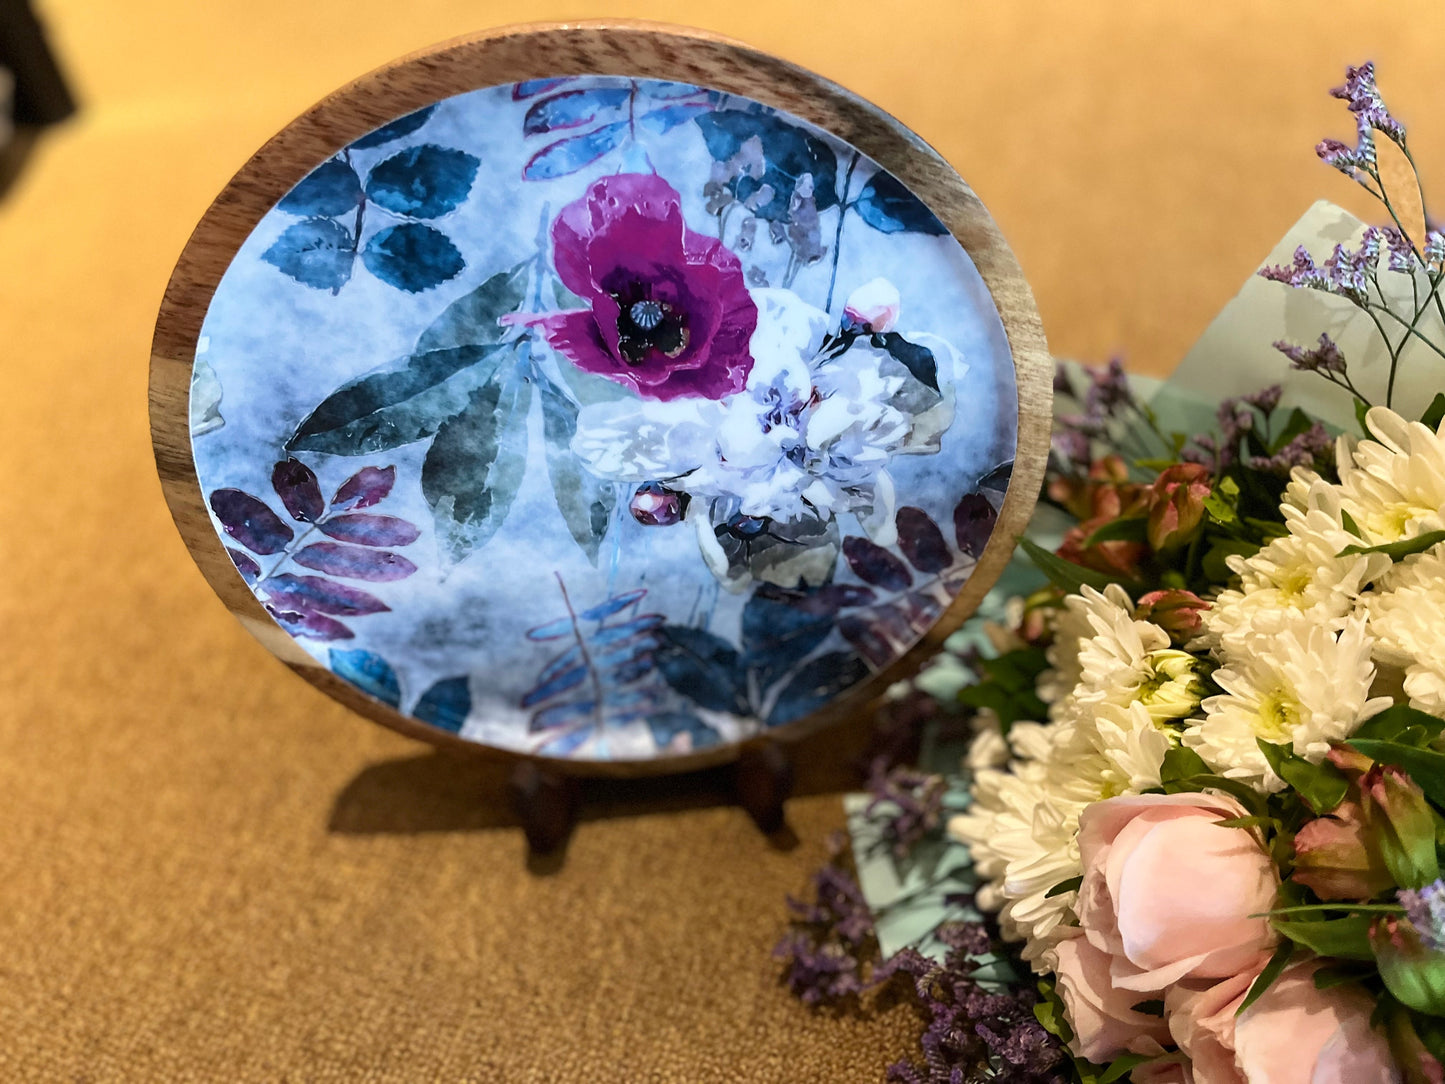 Winter Blossom - Plate for Corporate Gifts